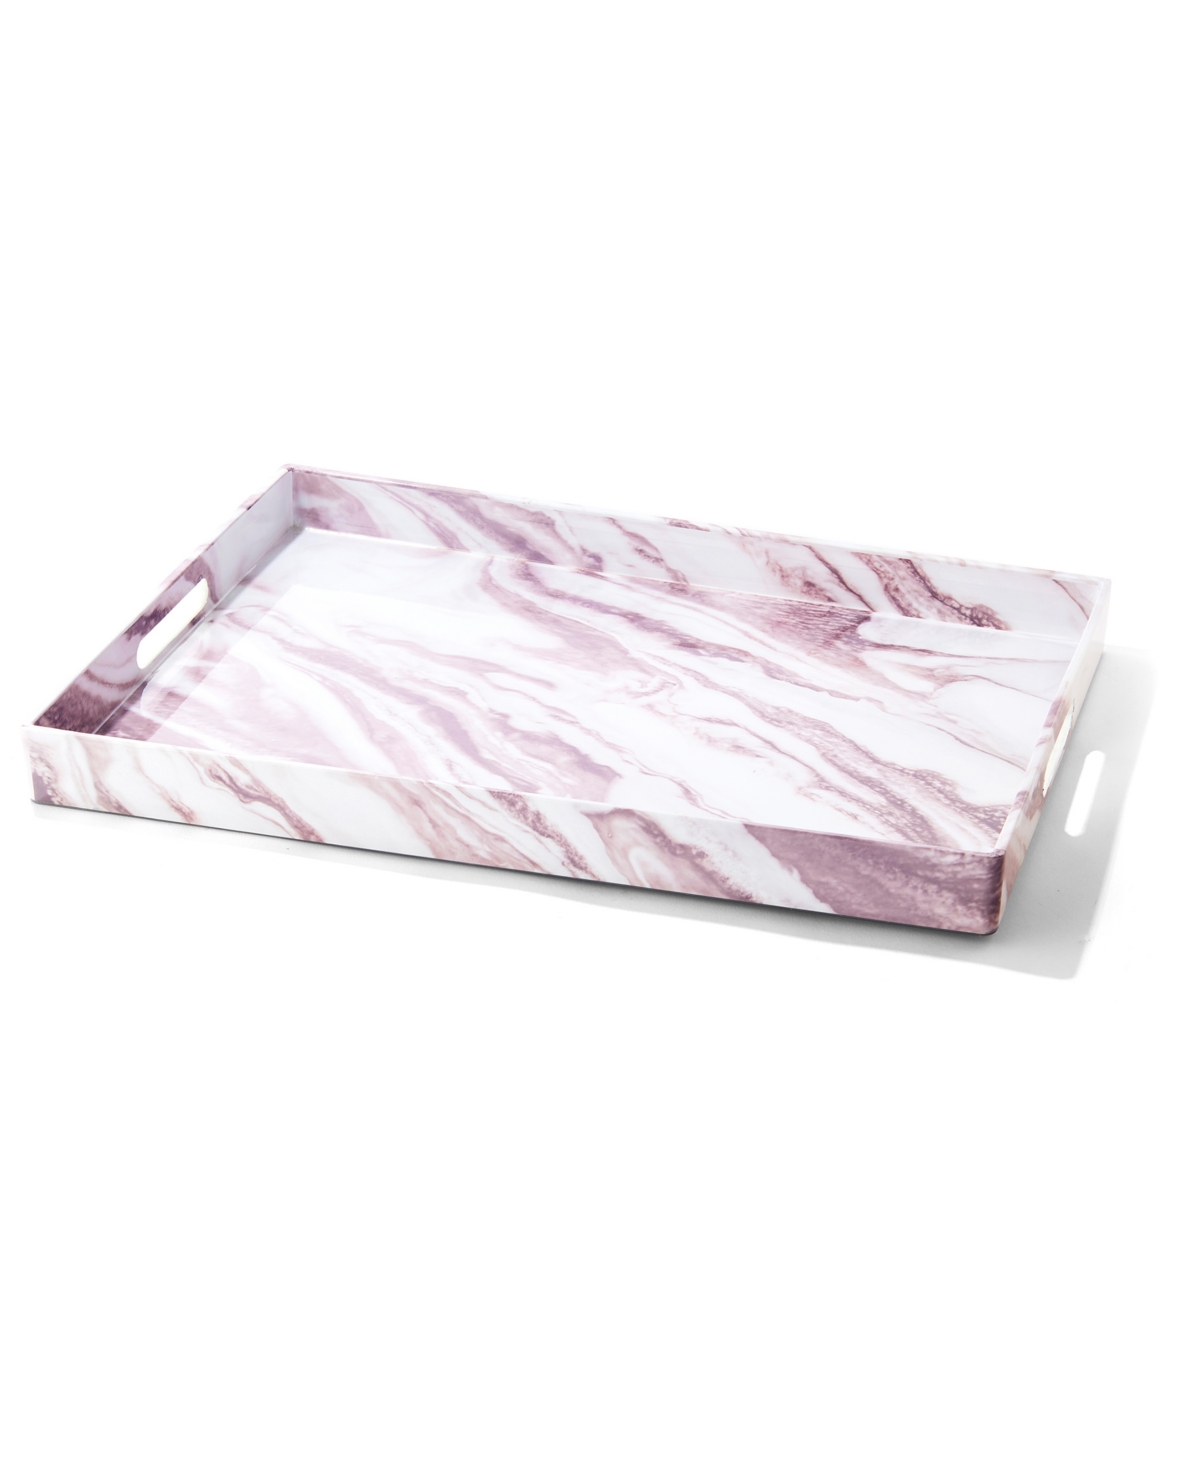 AMERICAN ATELIER MARBLE FINISH RECTANGLE TRAY